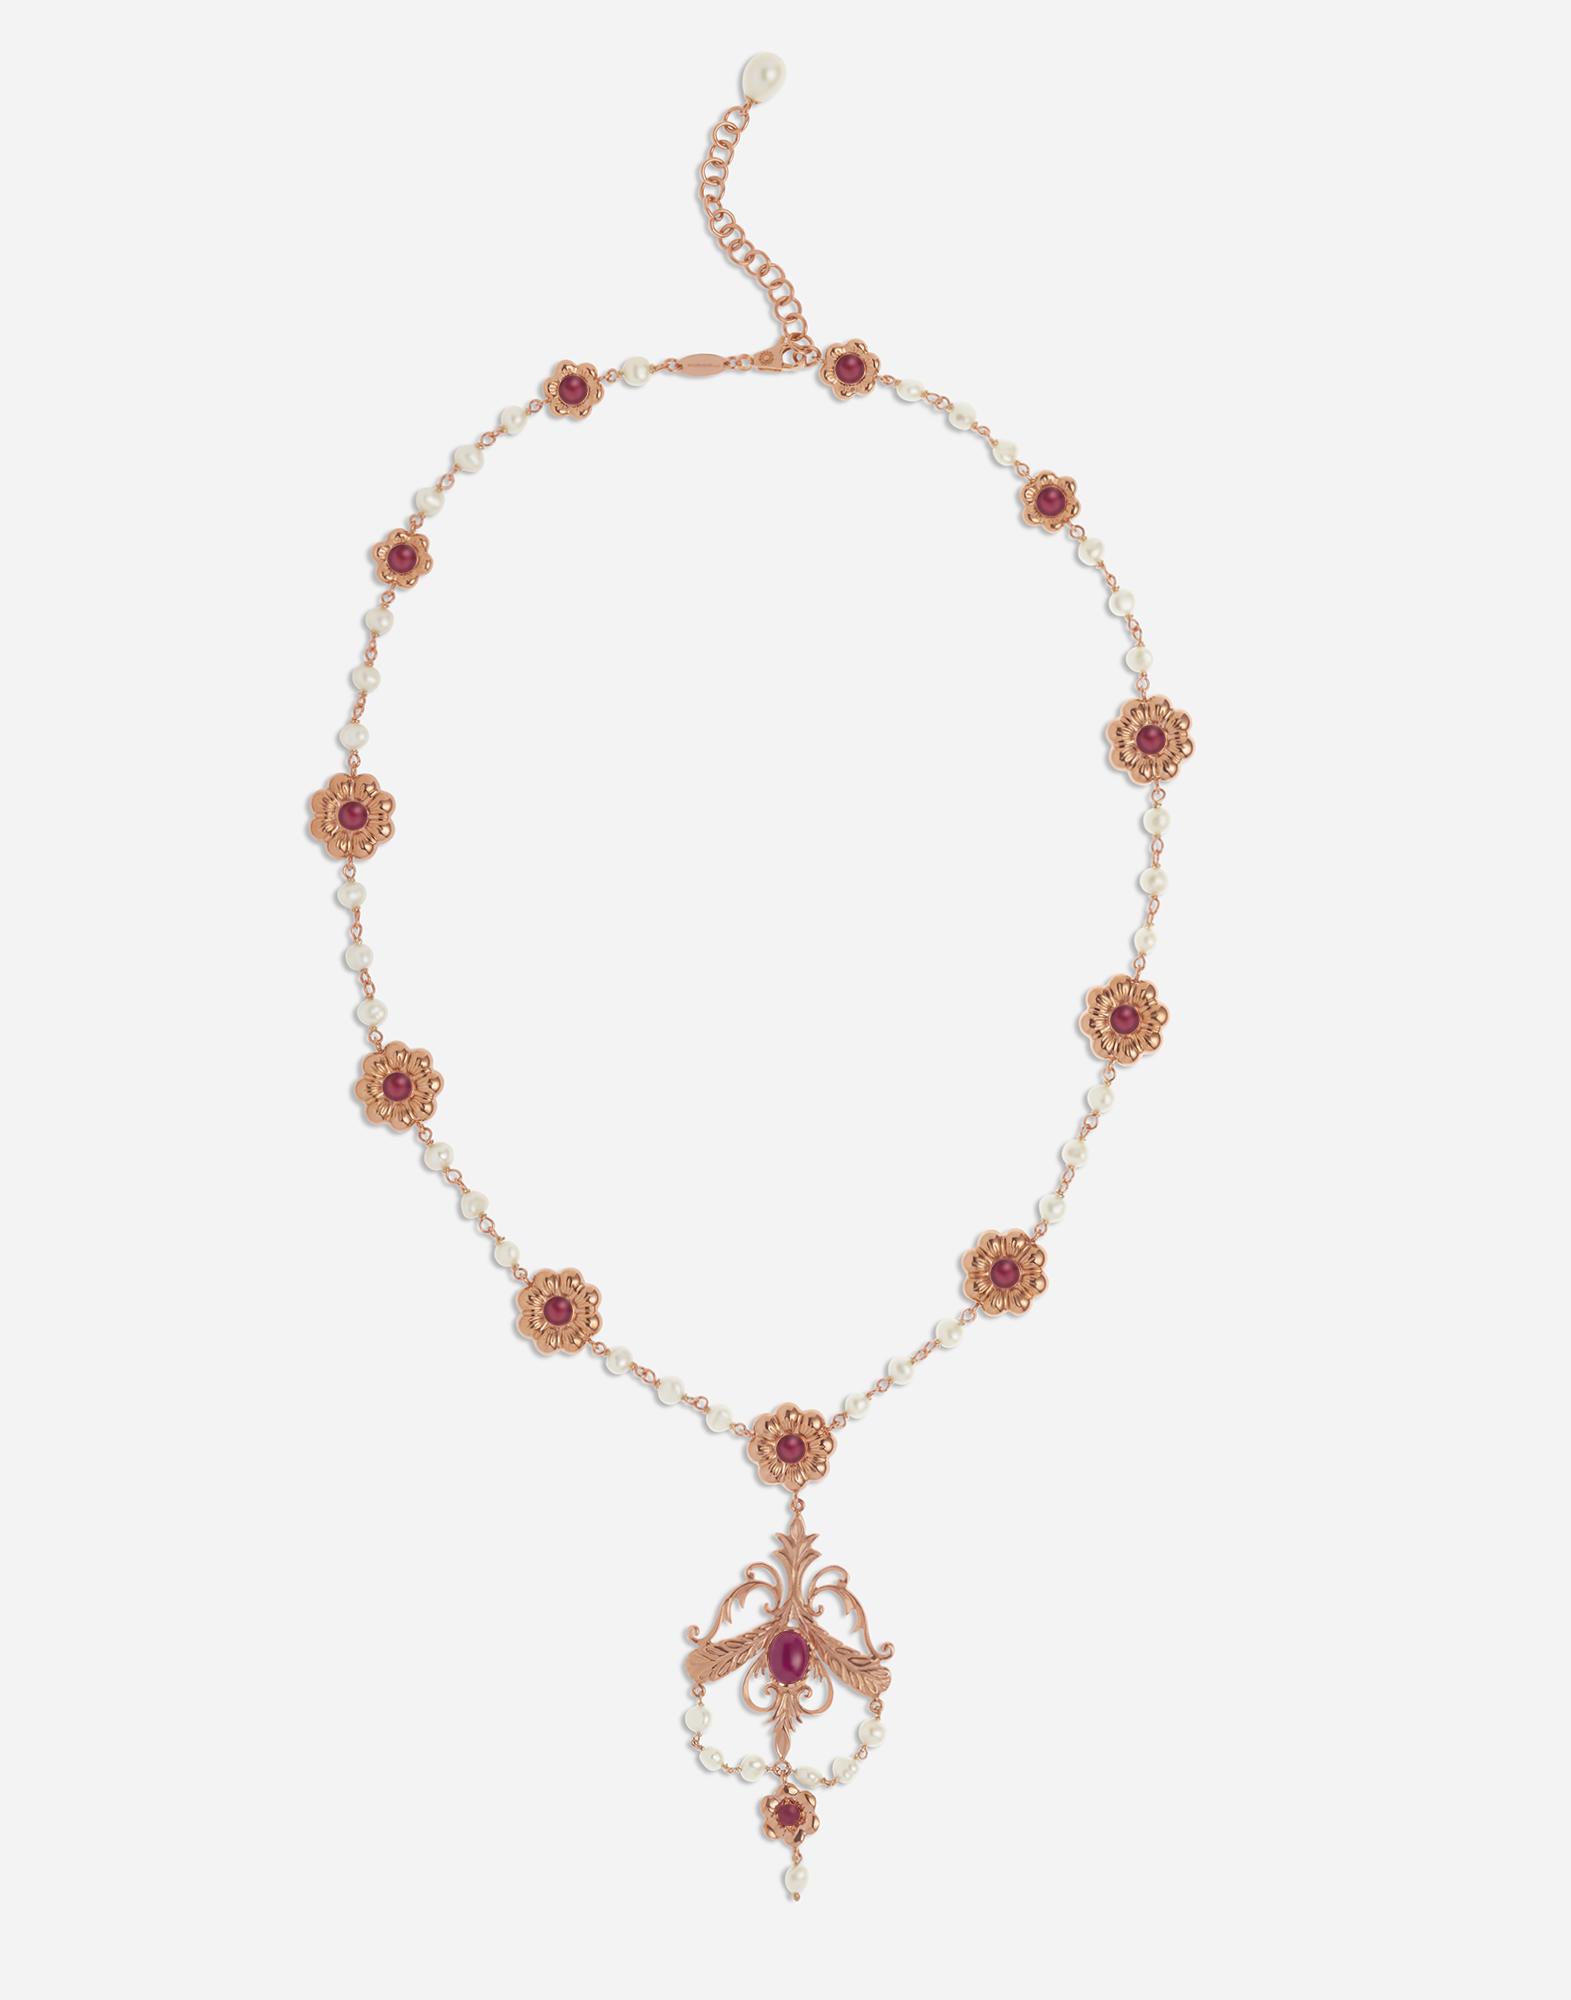 Necklace with floral elements and pendant in Gold